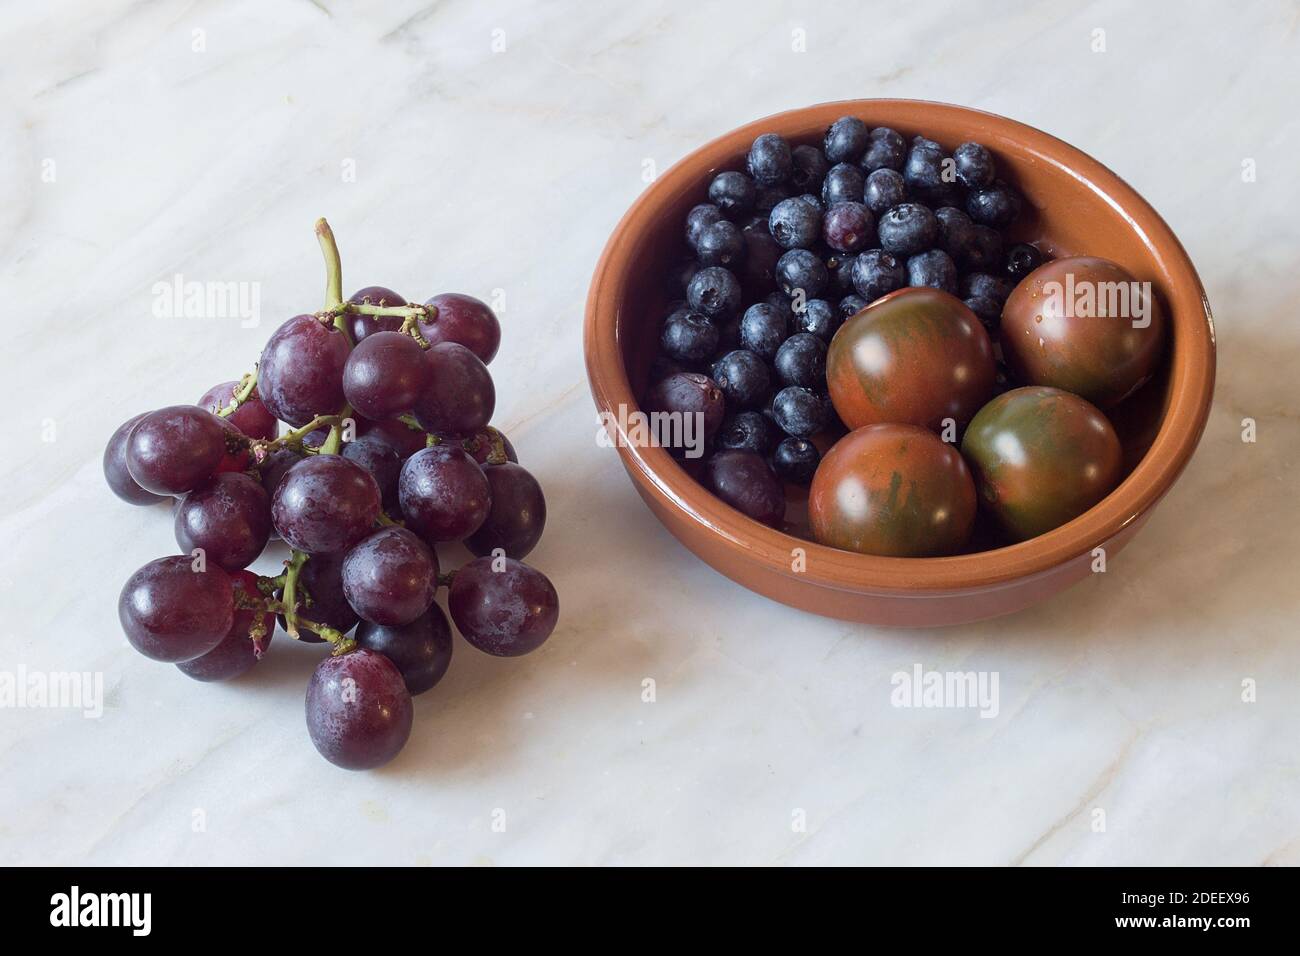 A rustic wooden bowl with blueberries and tomatoes from the garden next to a bunch of black grapes on an antique marble table. Healthy ingredients. Stock Photo